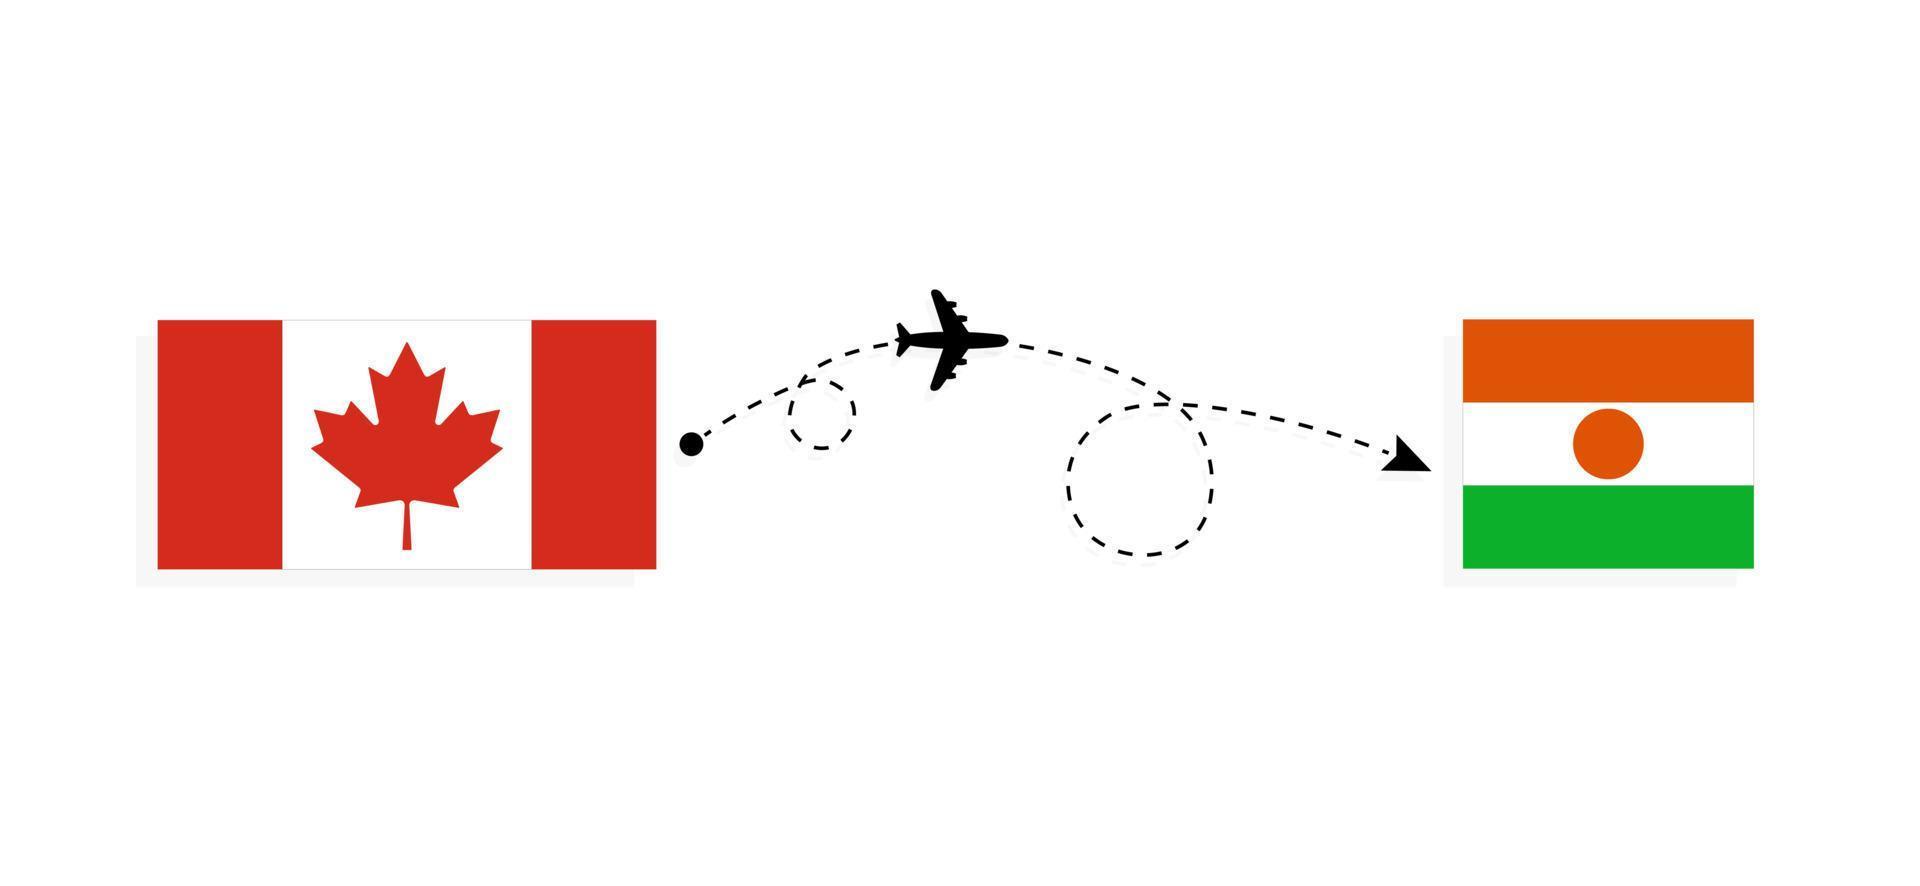 Flight and travel from Canada to Niger by passenger airplane Travel concept vector